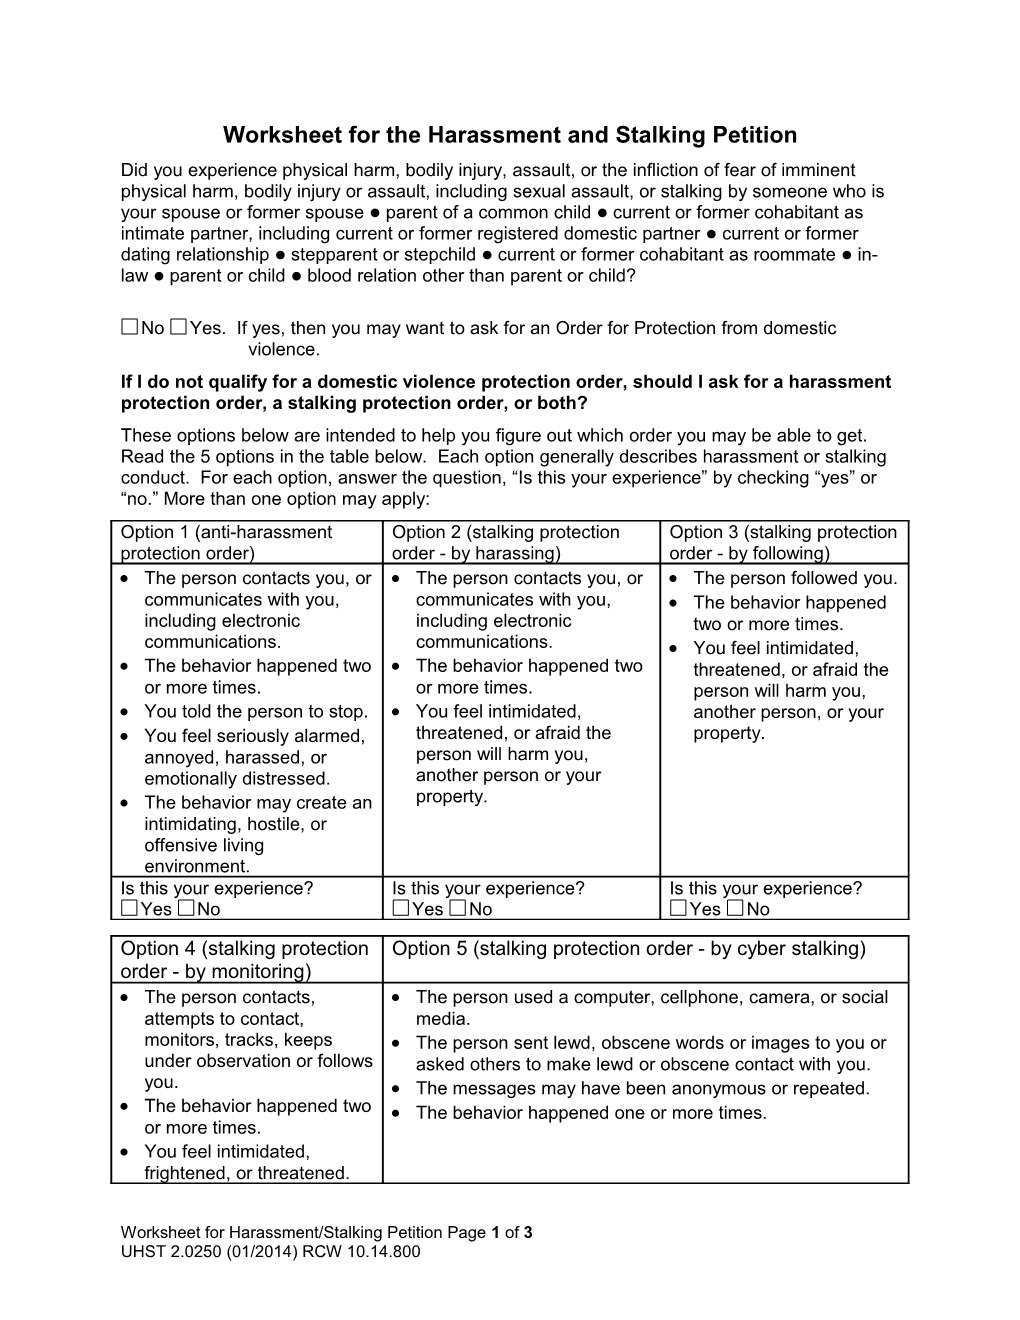 Worksheet for the Harassment and Stalking Petition